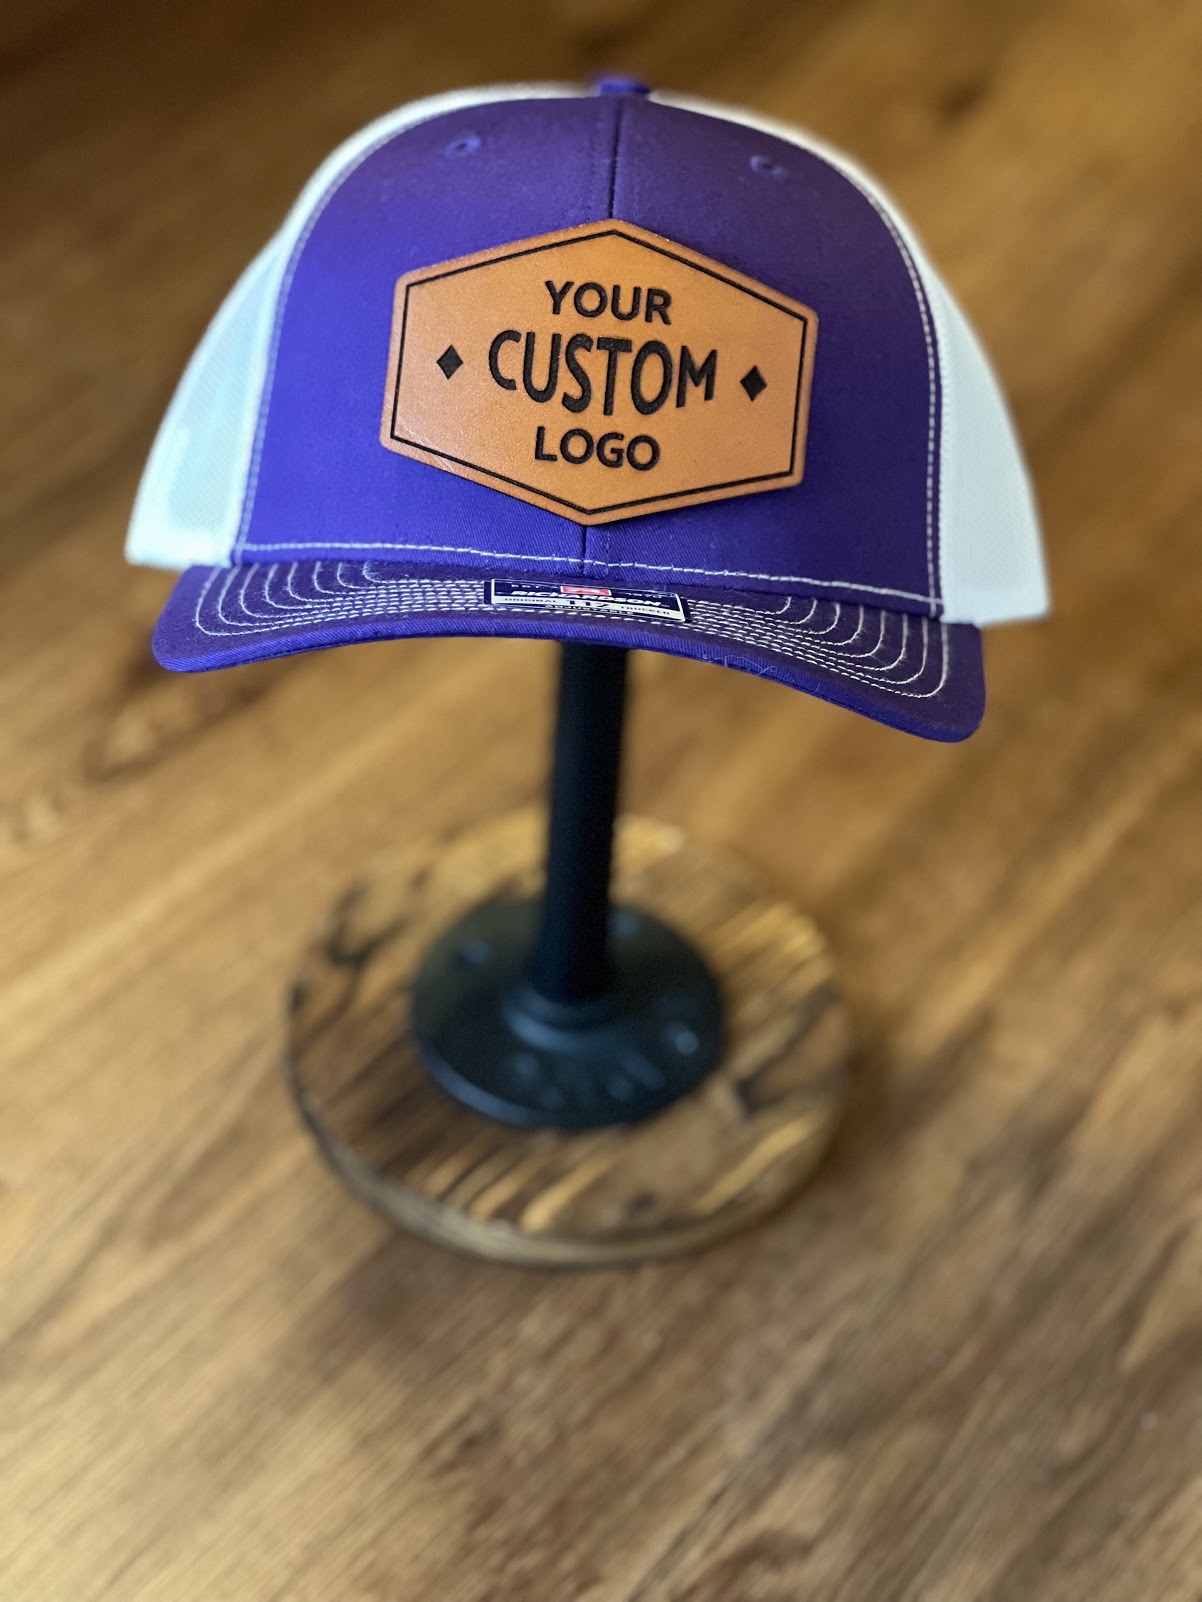 10 Creative Hat Design Ideas with Personalized Patches ⋆ Sienna Pacific